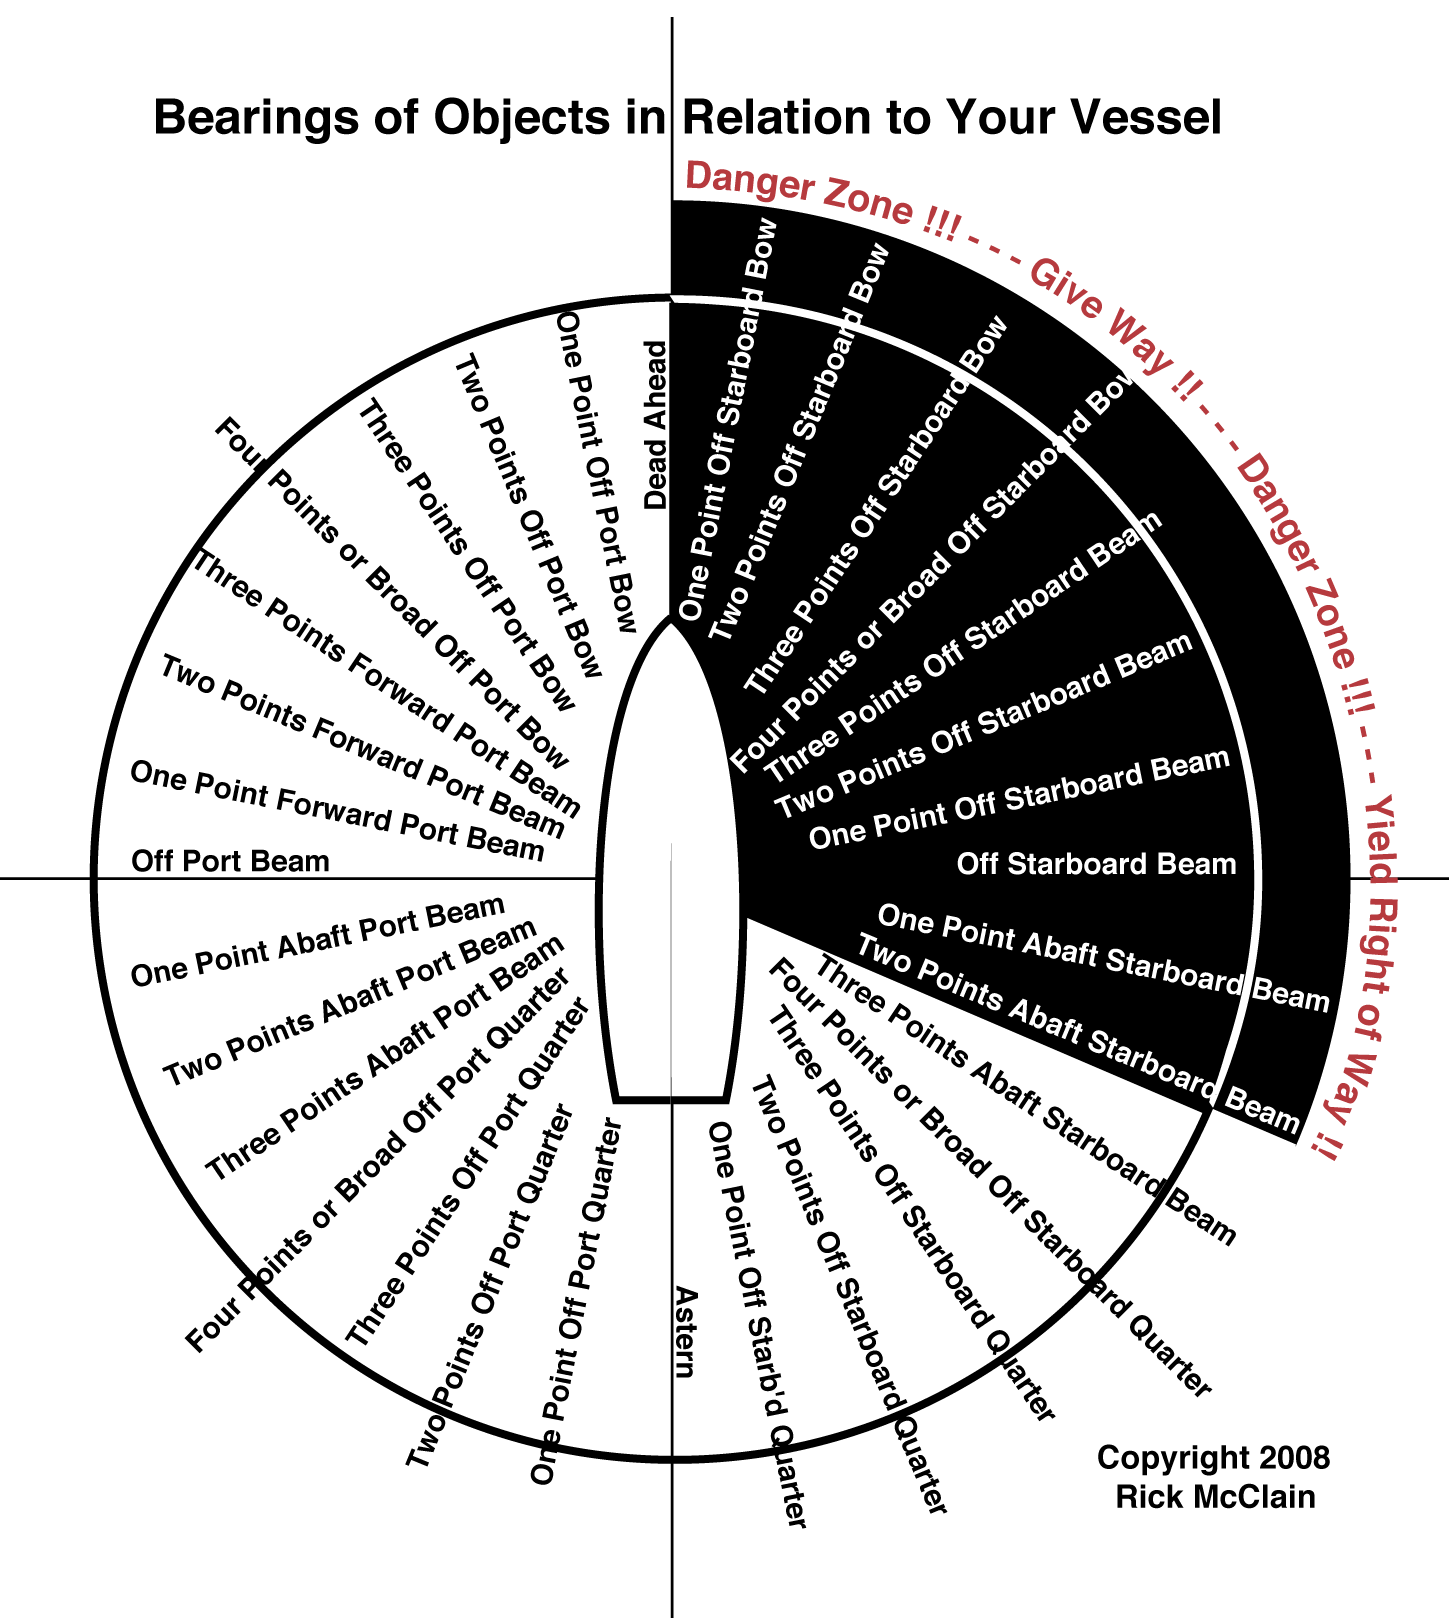 an illustration showing when your vessel must give right of way when medium